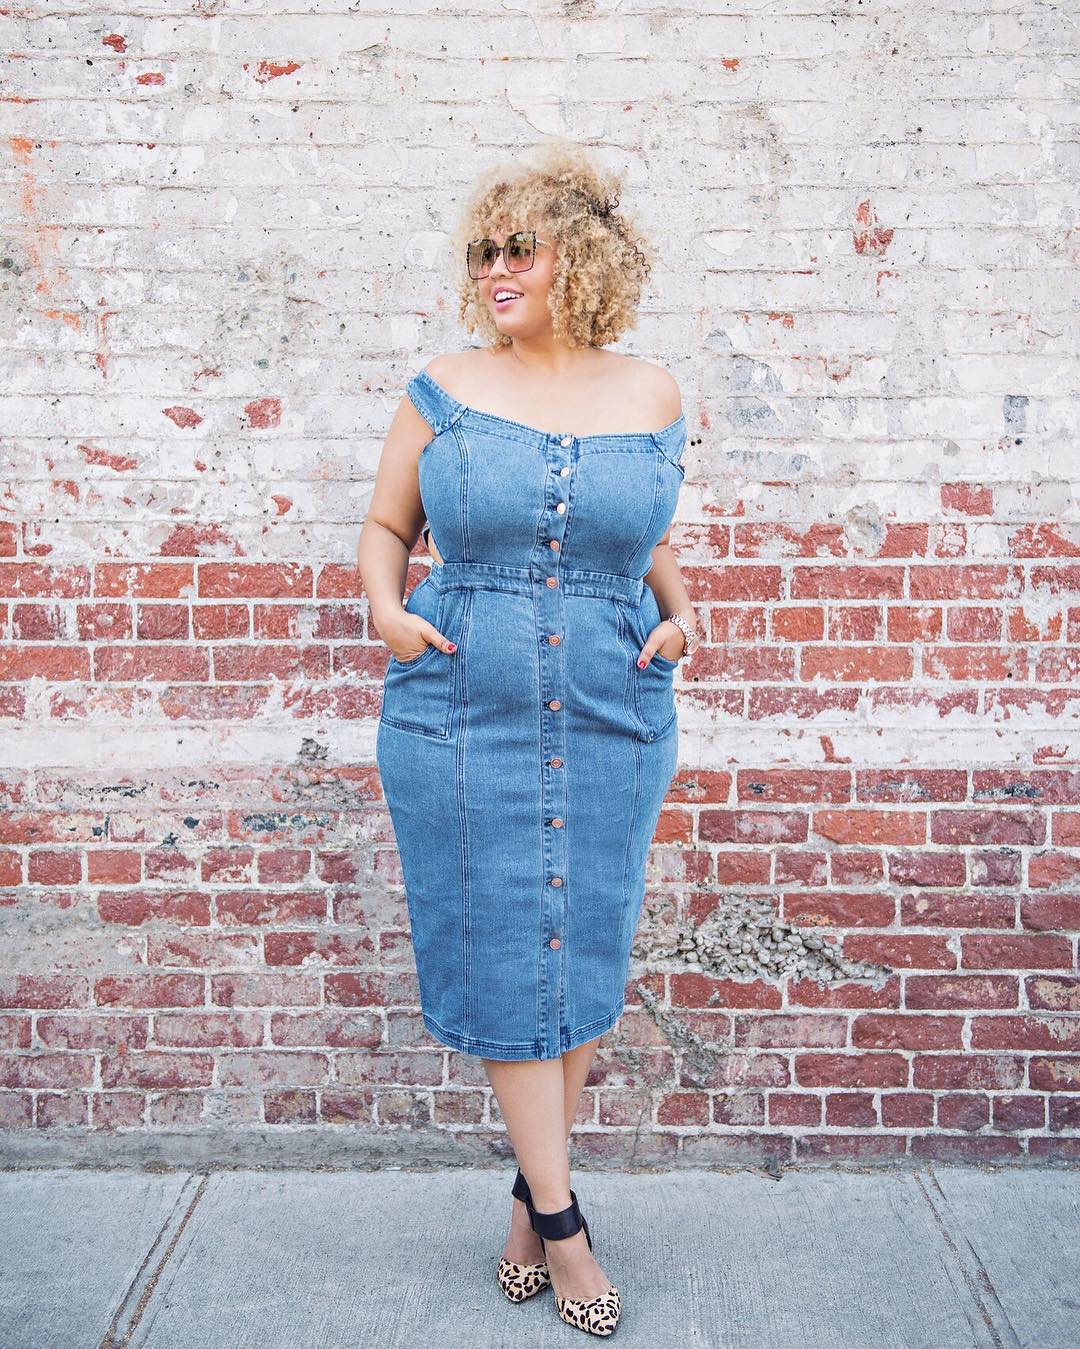 18 Best Plus Size Celebrity Outfits (7)